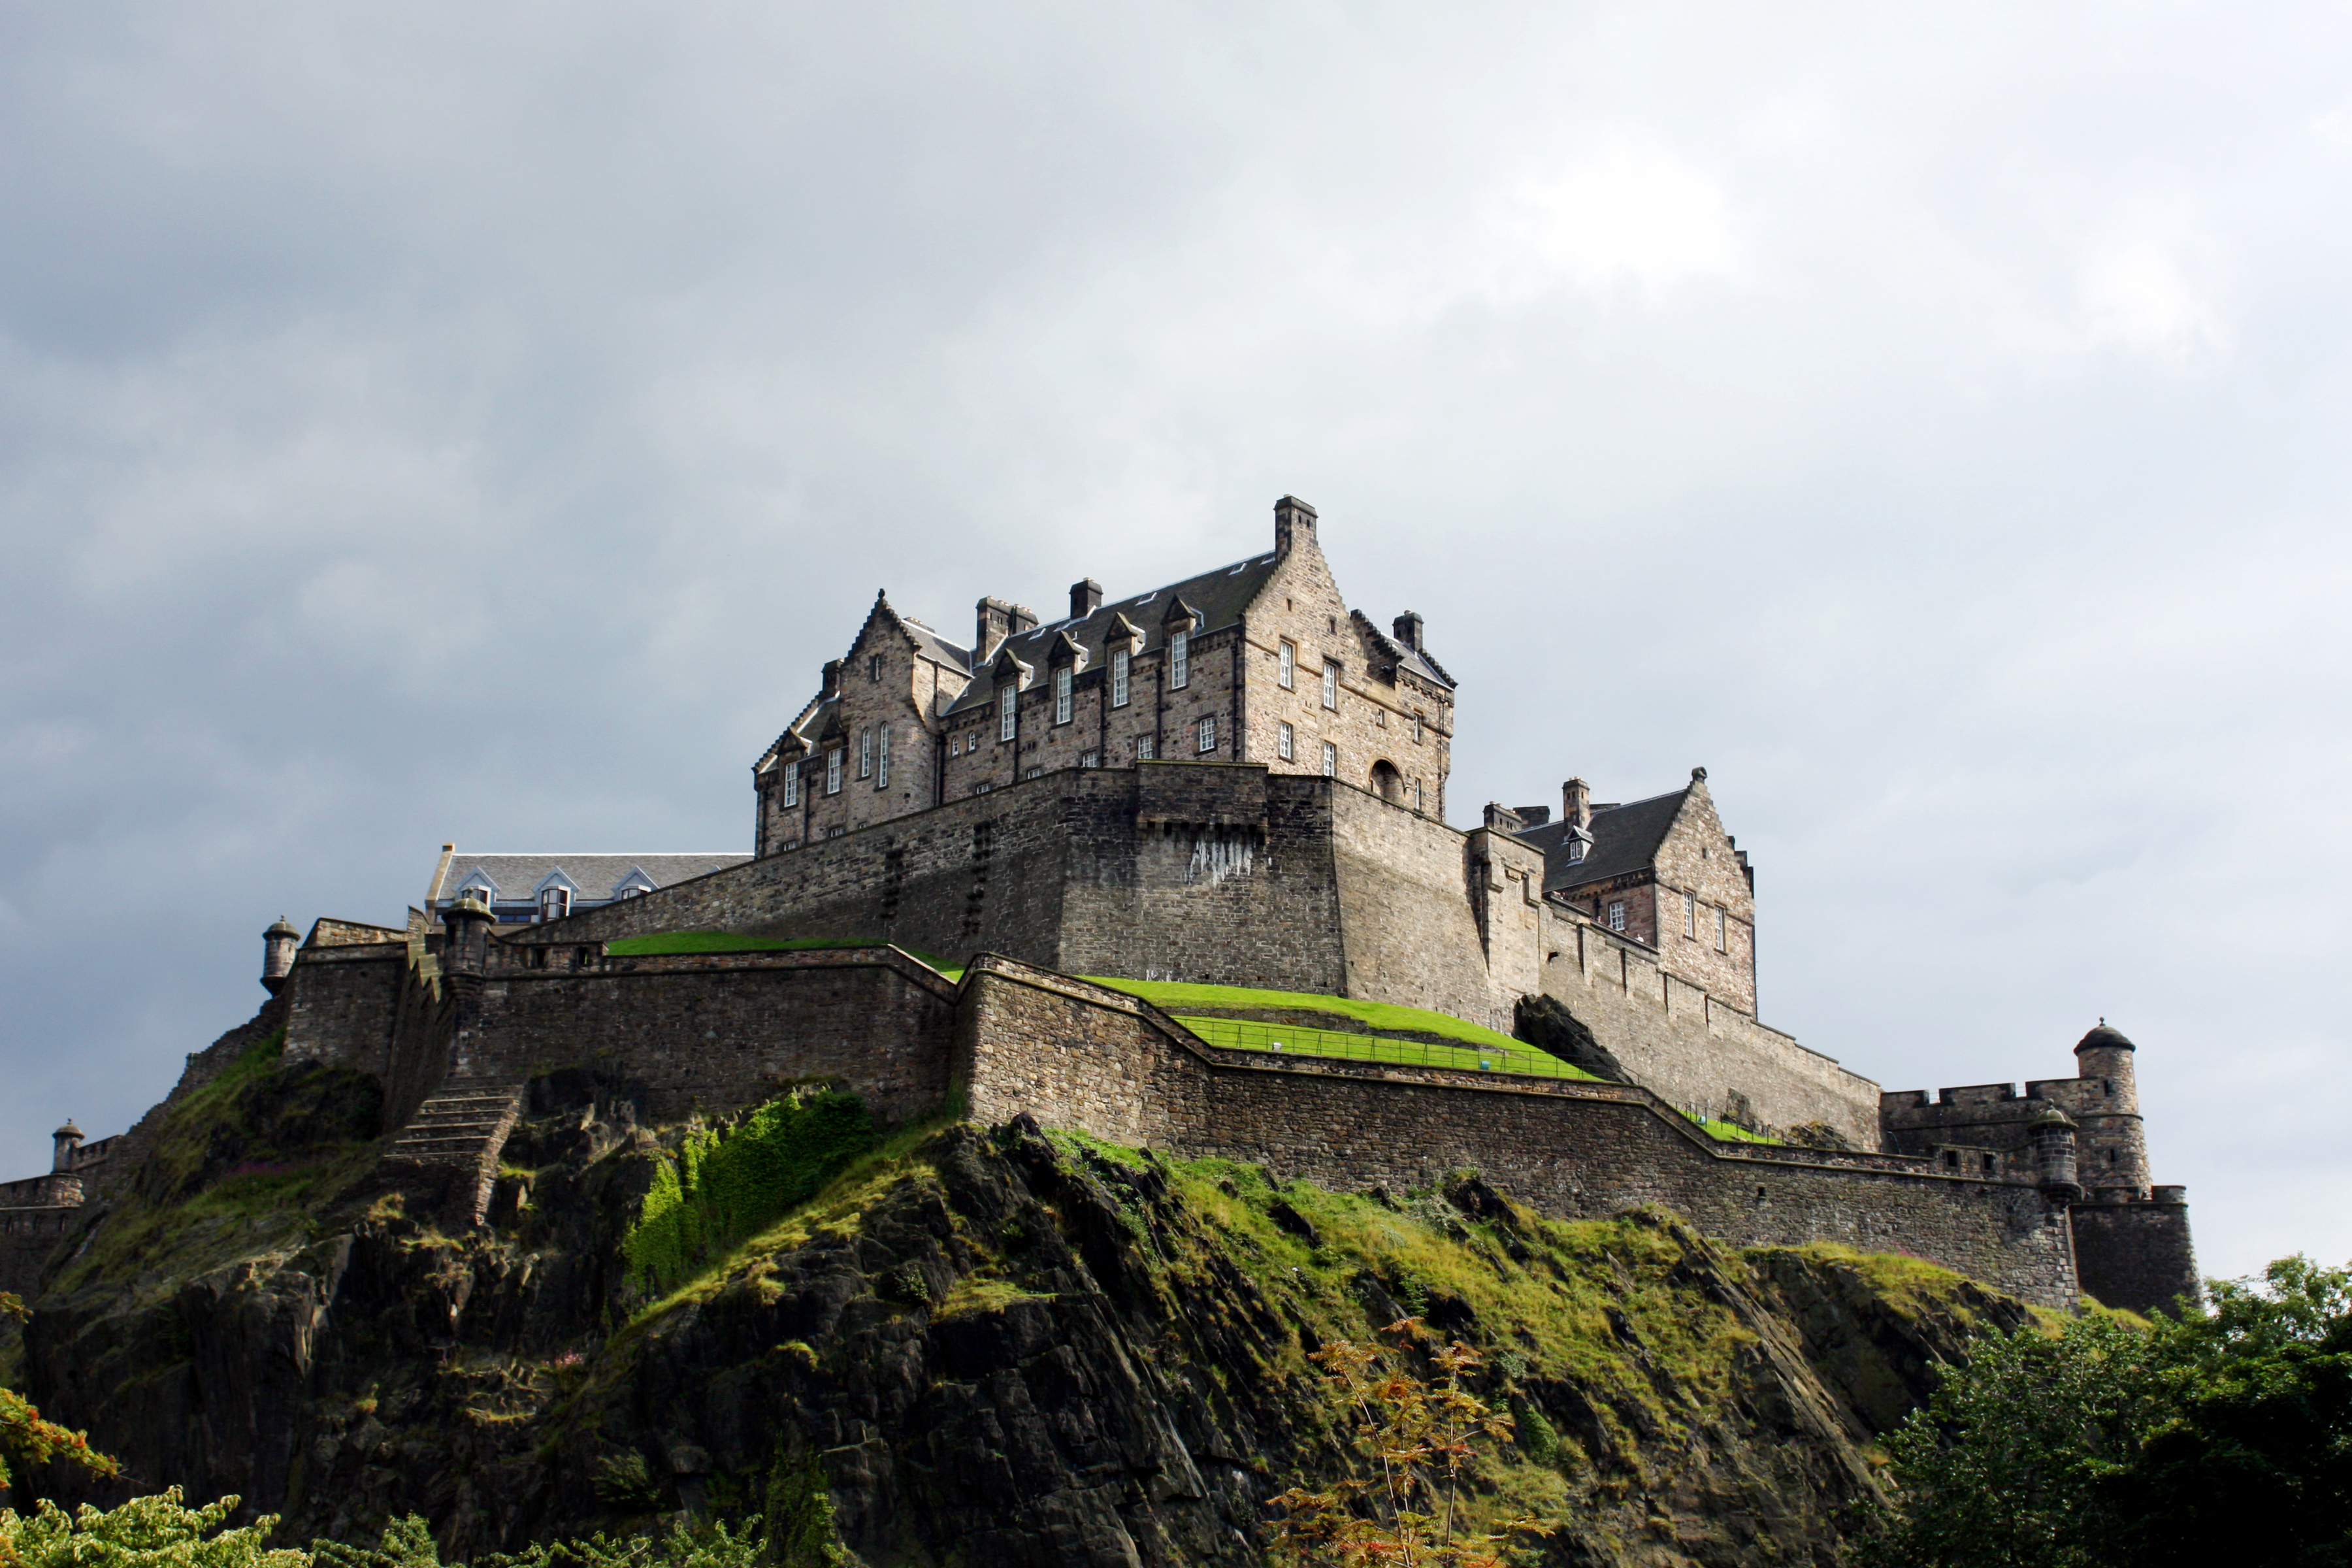 Edinburgh may soon introduce a 'tourism tax' on overnight visitor stays.